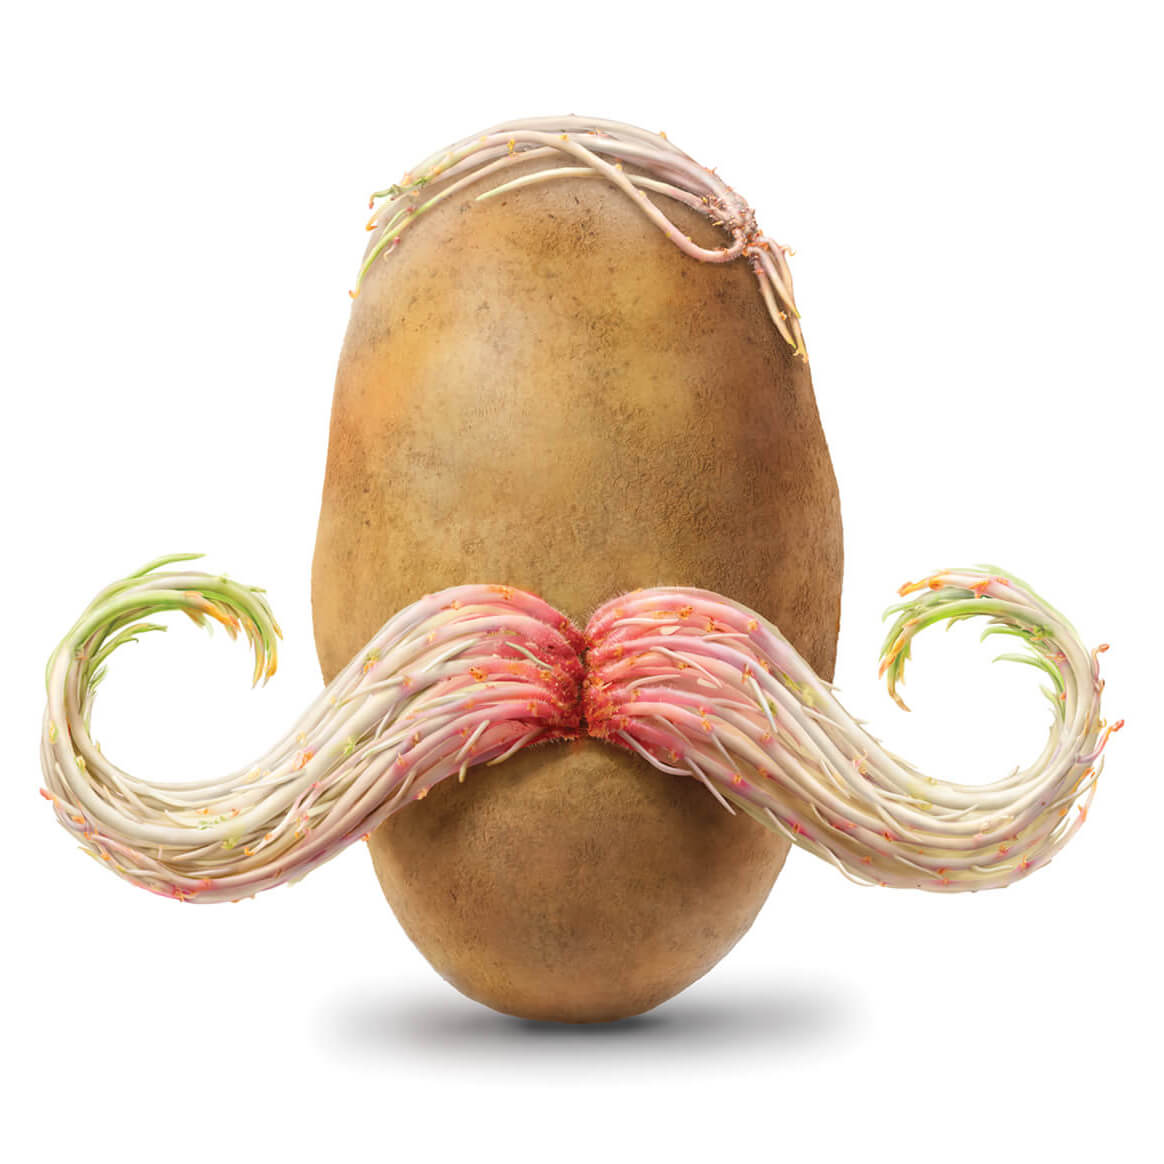 Amvac Smartblock, illustrations of a potato with roots shaped as a large mustache